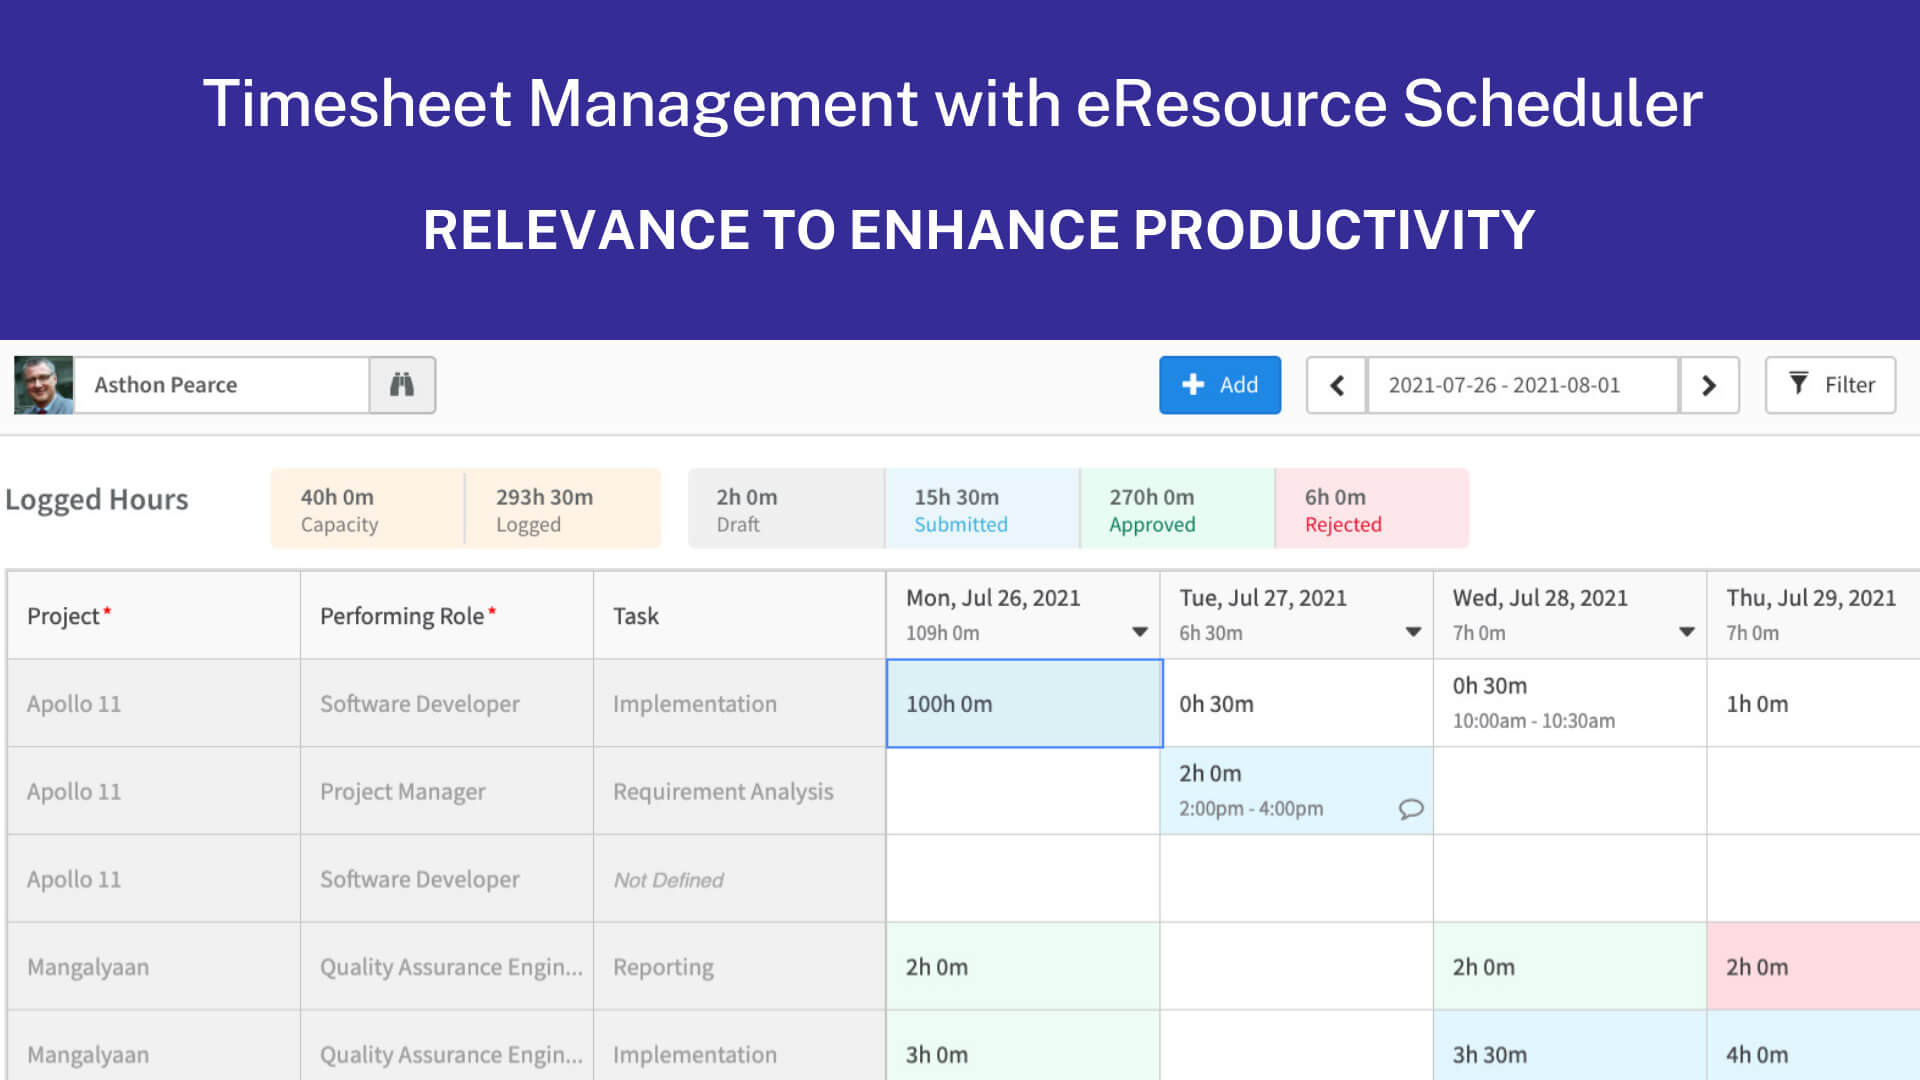 Timesheet Management With eResource Scheduler  - Relevance To Enhance Productivity